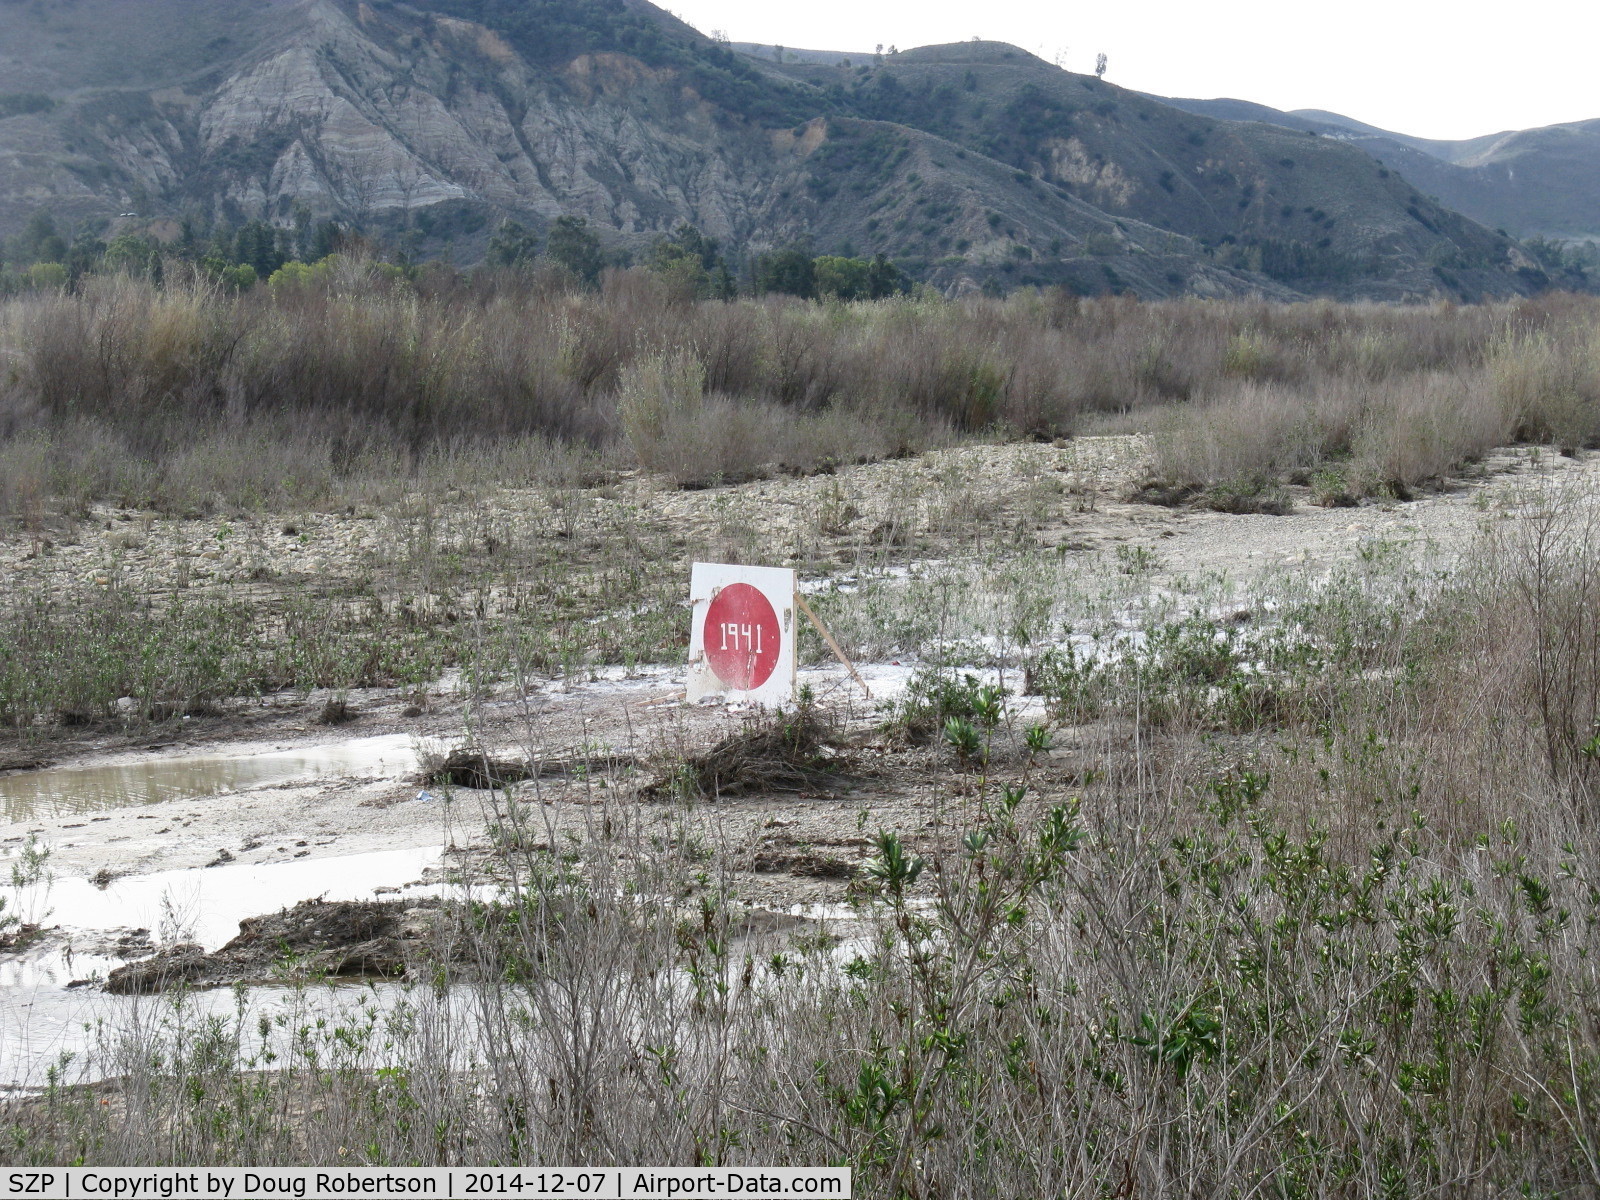 Santa Paula Airport (SZP) - Flour Bomb Target set up in Santa Clara dry River-bed for commemoration of 7 December 1941 Pearl Harbor attack, planes flown by the Condor Squadron pilots.